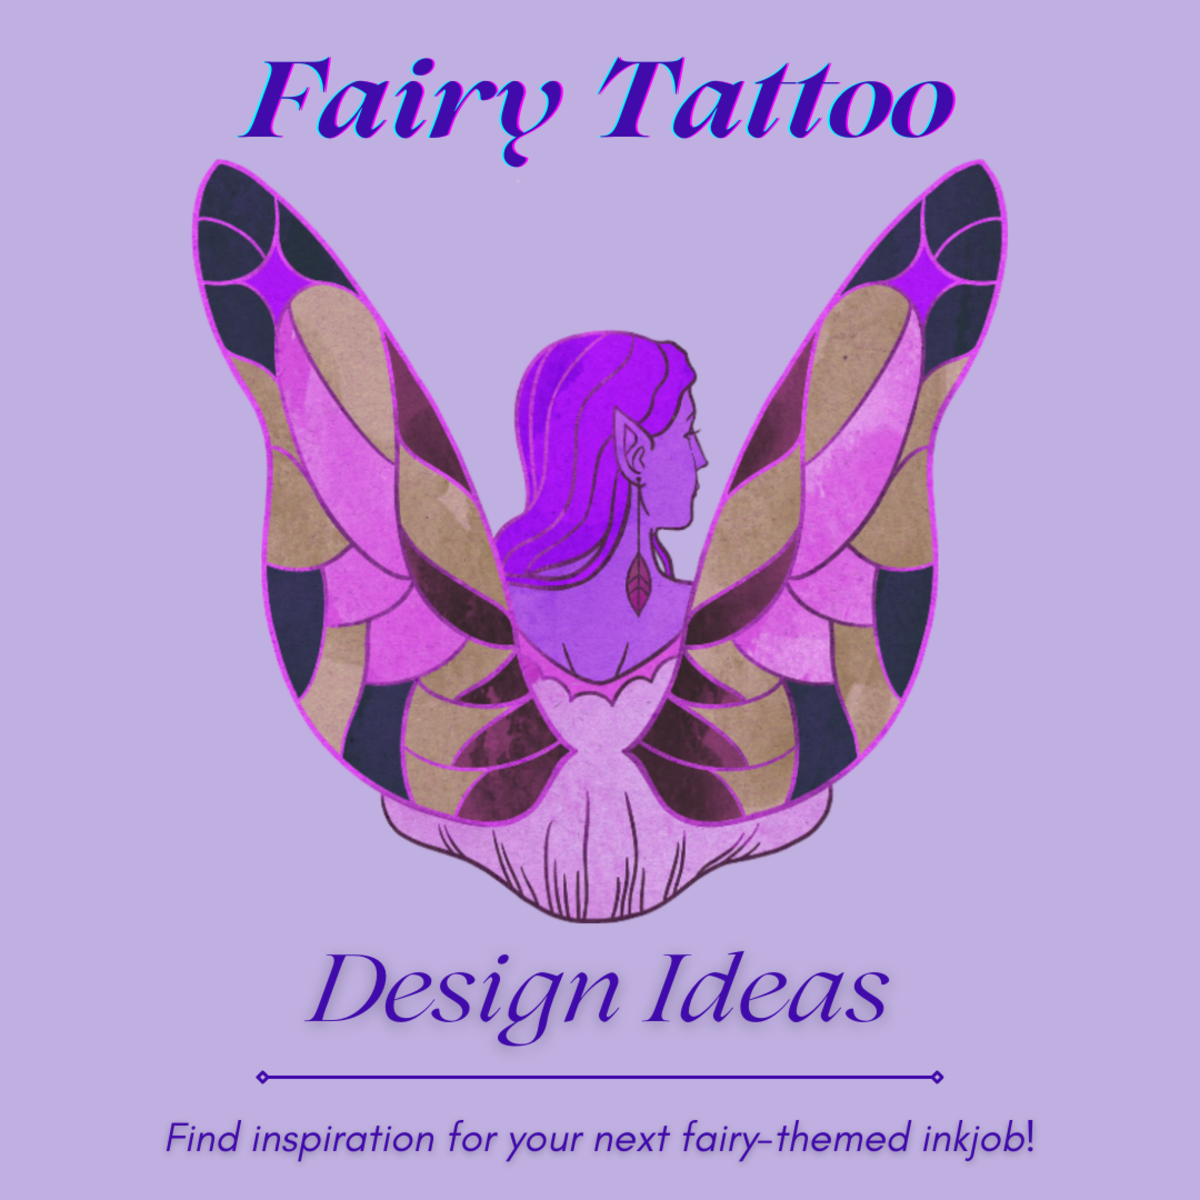 Cute and Sweet or Dark and Devious Fairy Tattoo Ideas